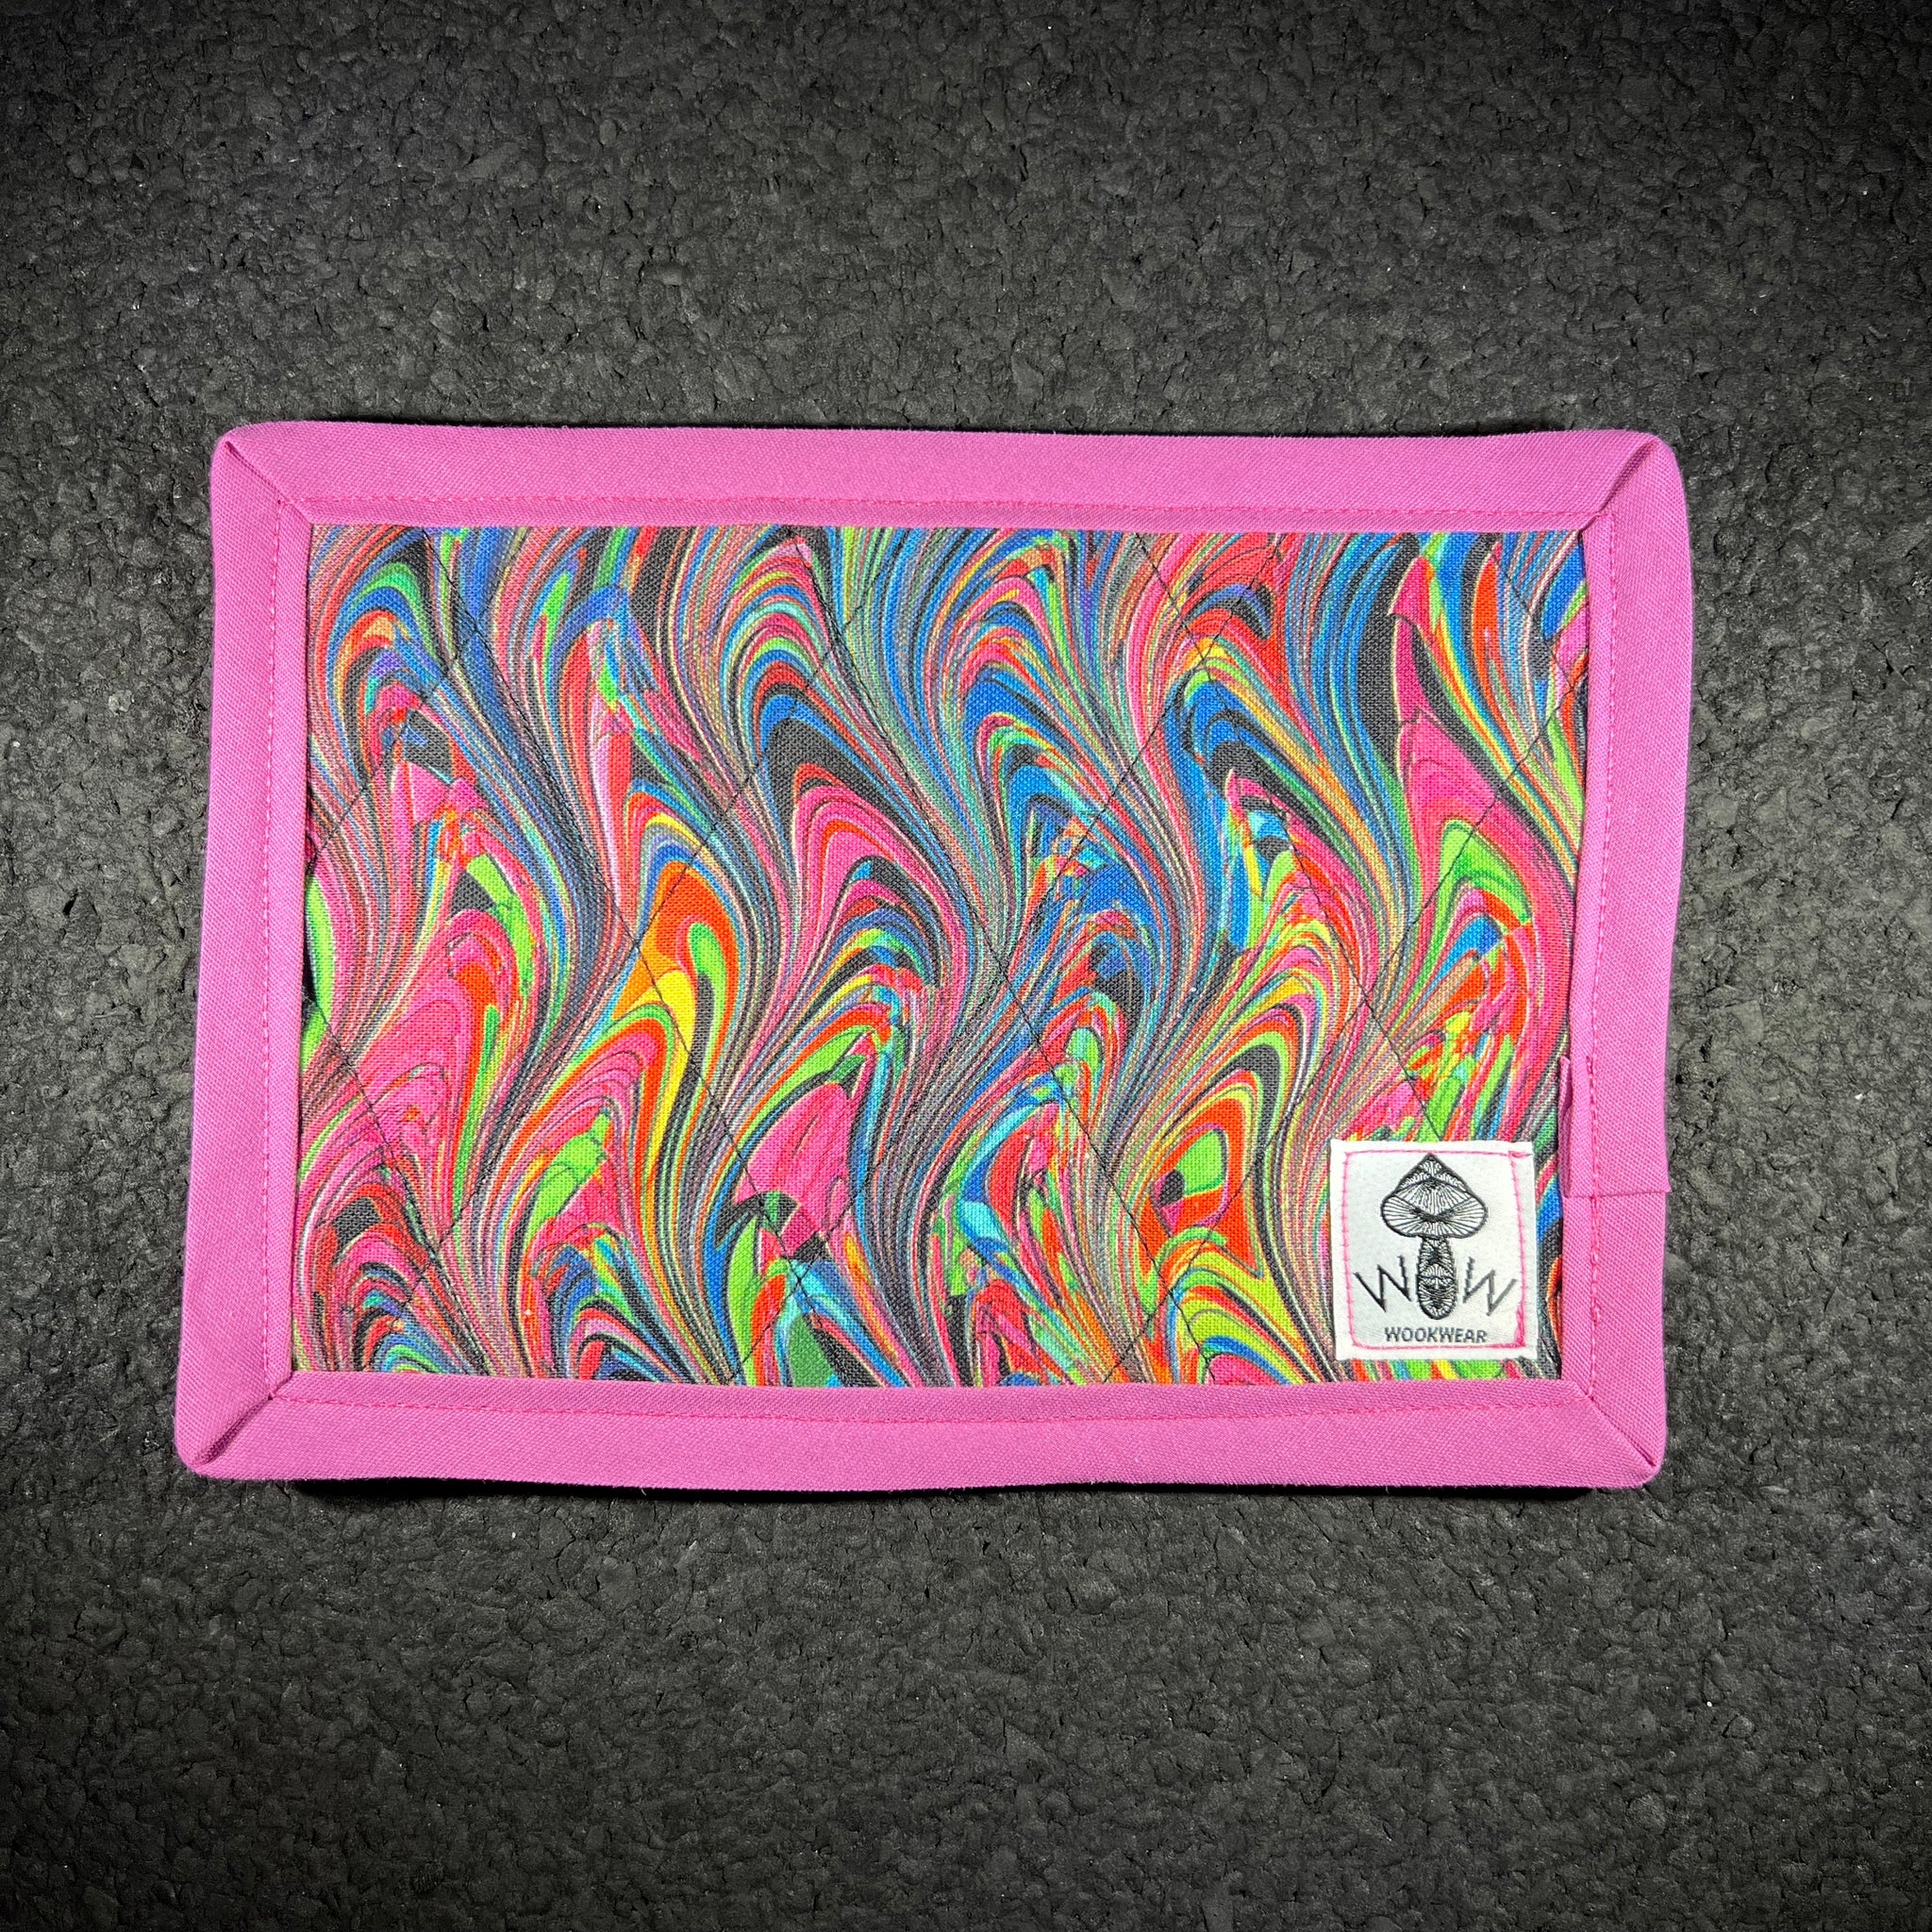 Wook Wear - Pink Quilted Psychedelic Rectangle Mat